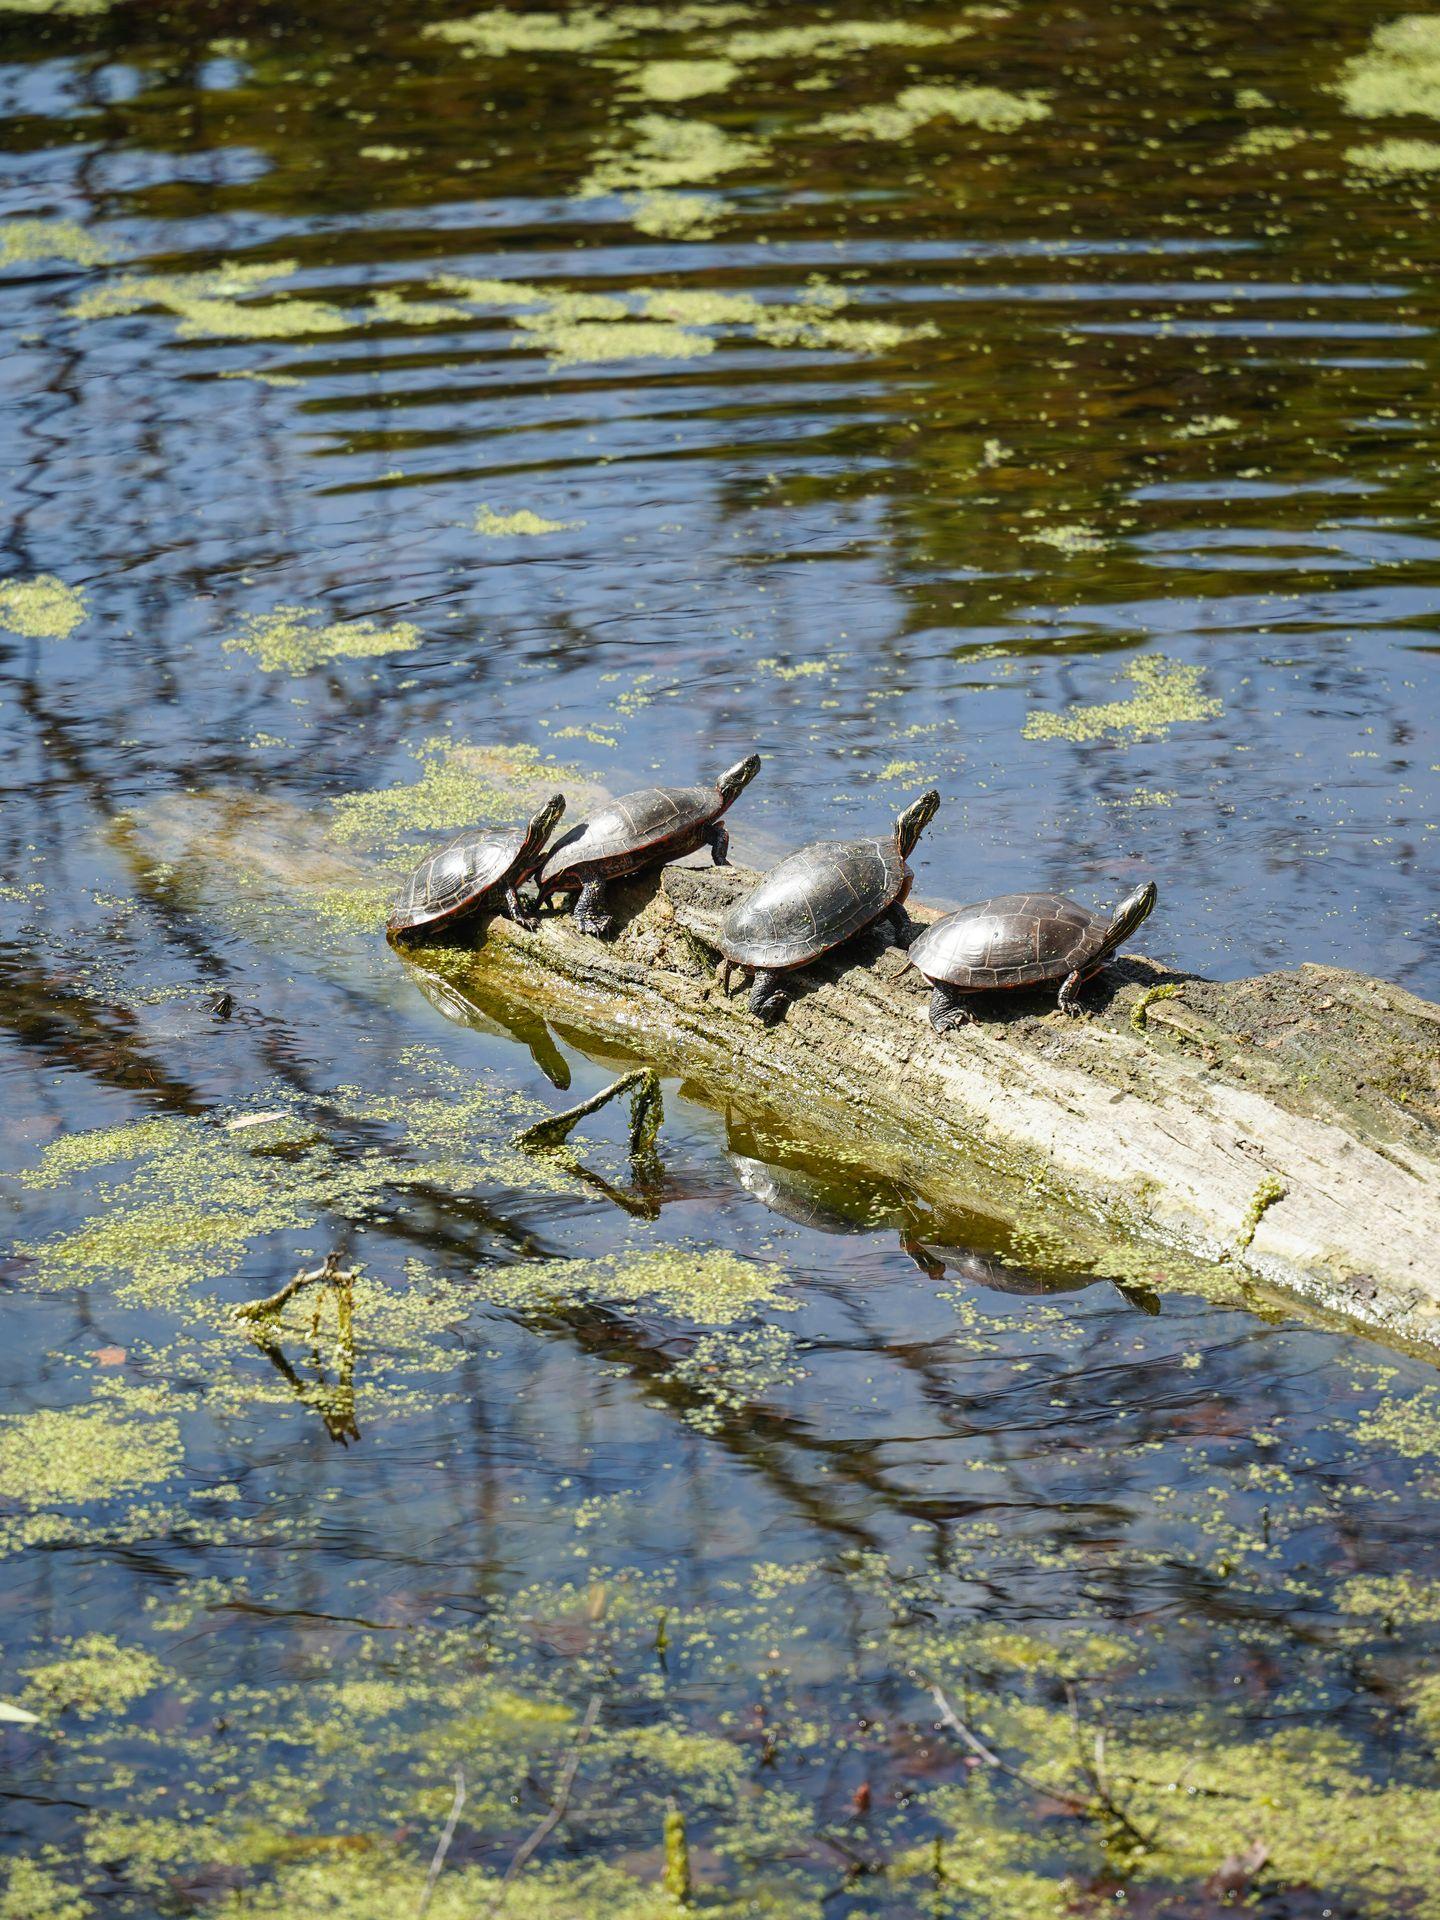 Four turtles on a log in a pond at Olbrich Botanical Gardens